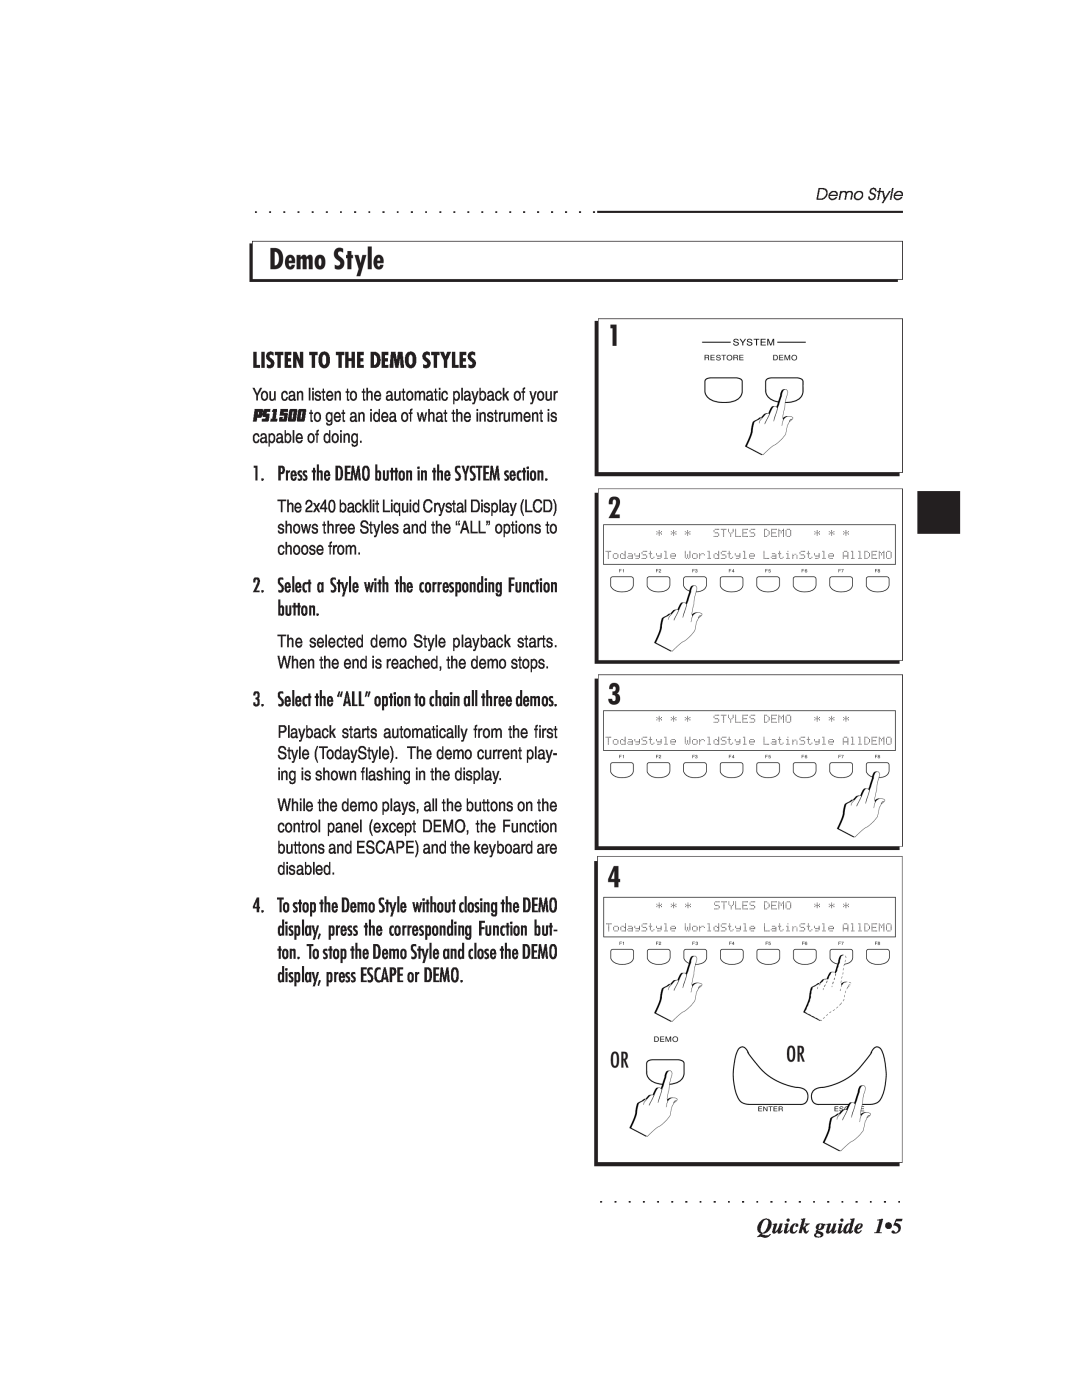 IBM PS1500 owner manual Listen To The Demo Styles, Quick guide 